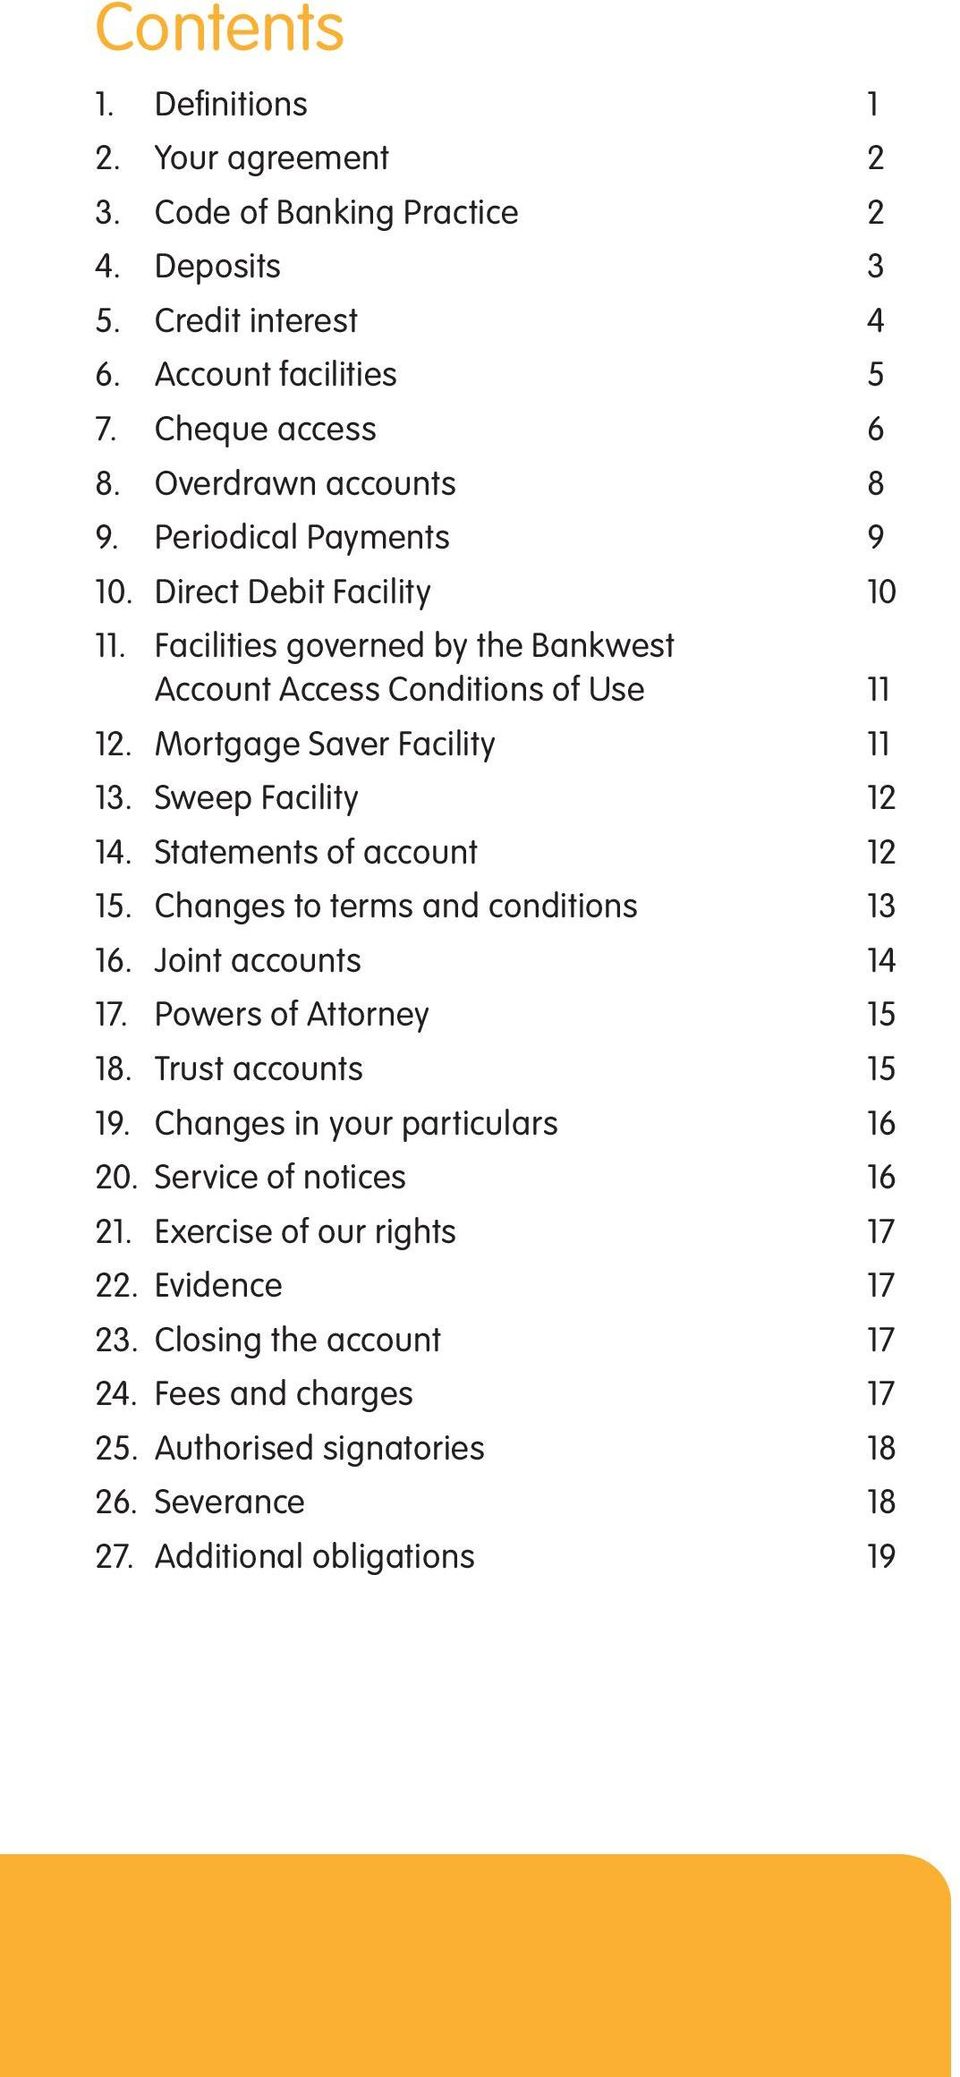 Statements of account 12 15. Changes to terms and conditions 13 16. Joint accounts 14 17. Powers of Attorney 15 18. Trust accounts 15 19. Changes in your particulars 16 20.